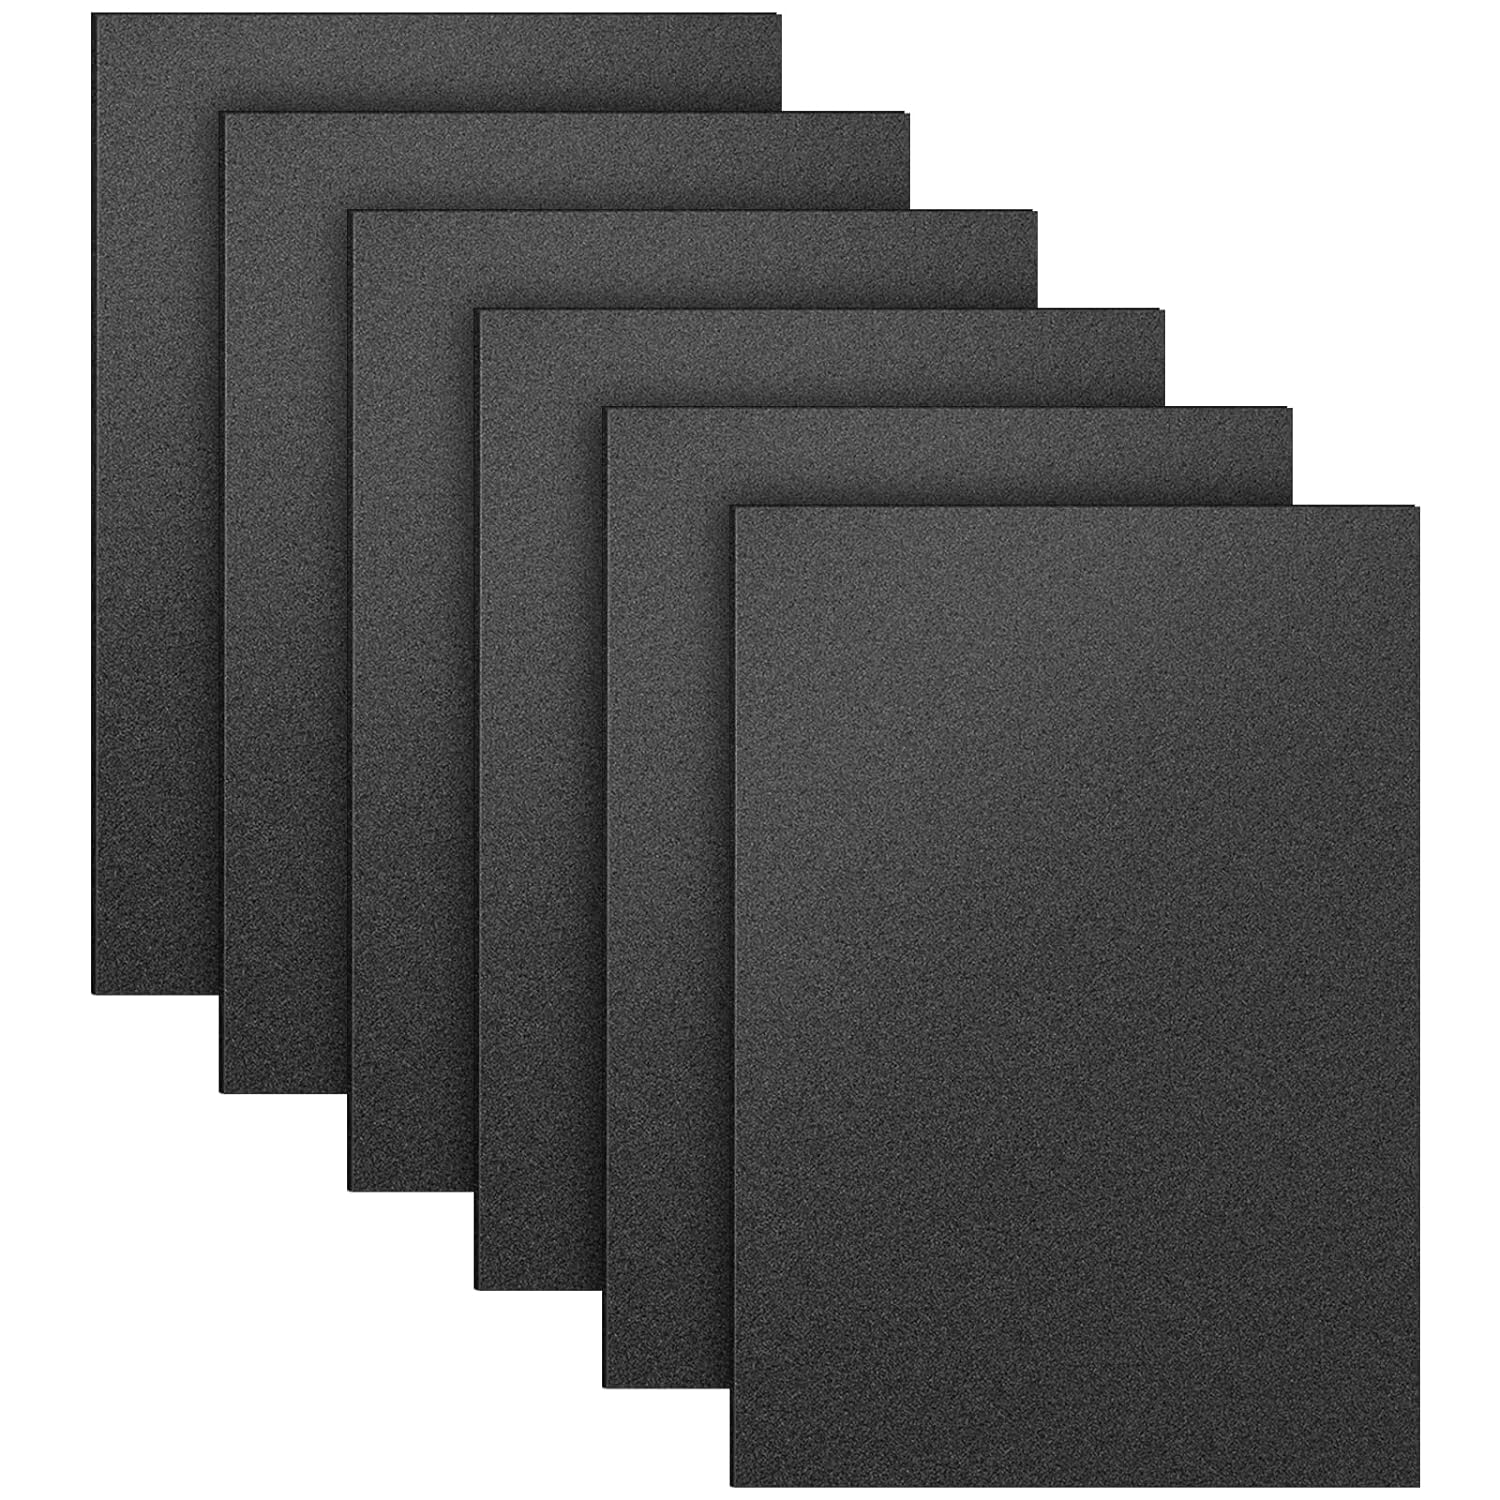 Paidu 6 Pack Black ABS Plastic Sheet 12" x 16" x 0.06" Great for DIY Projects High Tensile and Impact Strength Plastic Smooth & Textured